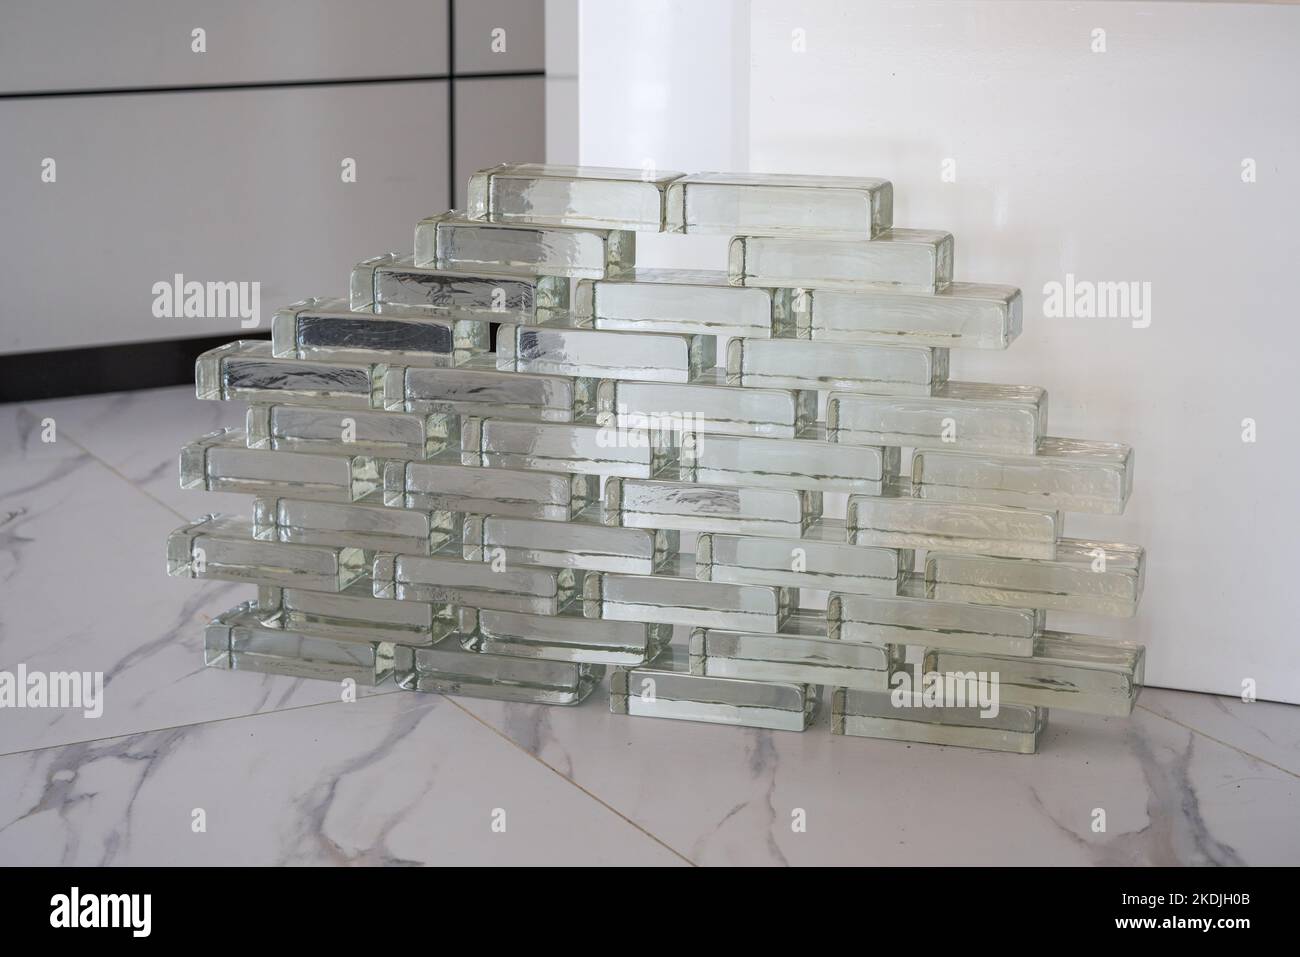 Close-up of glass bricks used for interior decoration Stock Photo